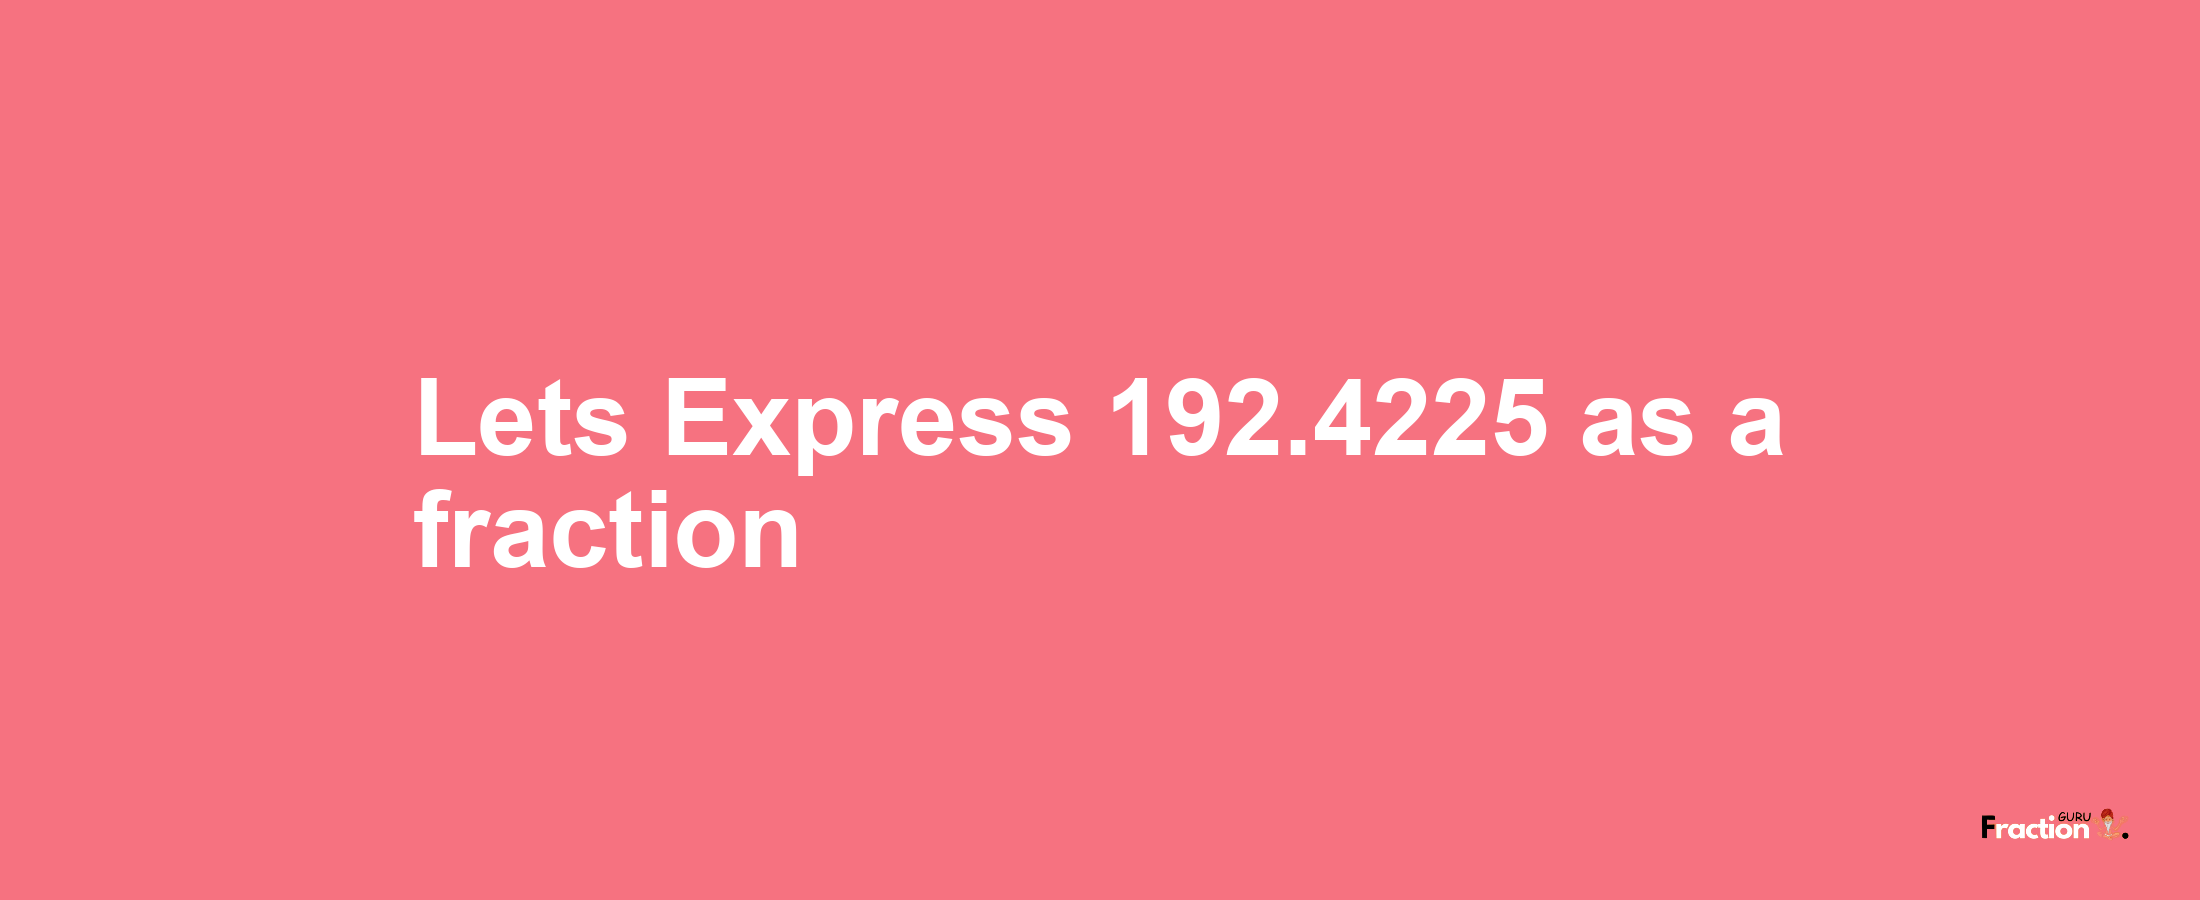 Lets Express 192.4225 as afraction